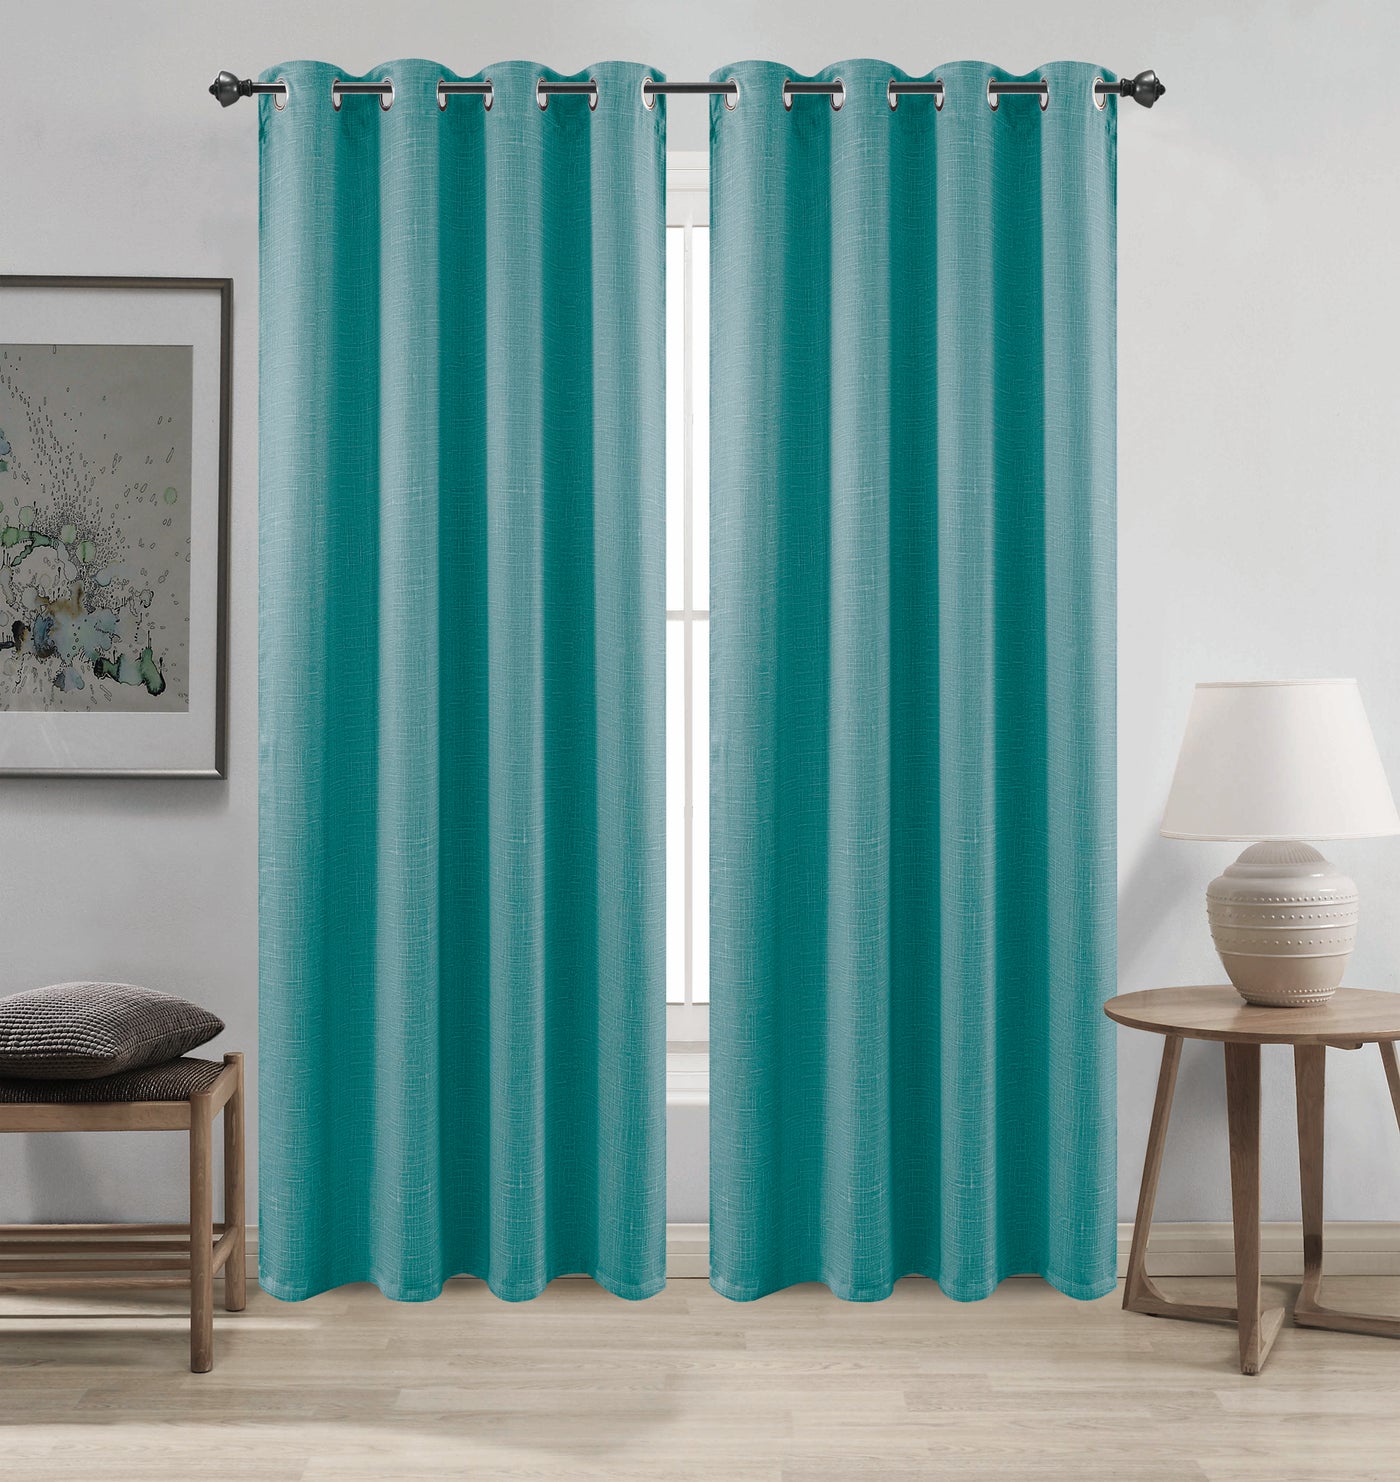 EMBOSSED THERMAL BLACKOUT WINDOW CURTAIN  WITH 8 GROMMETS BT442